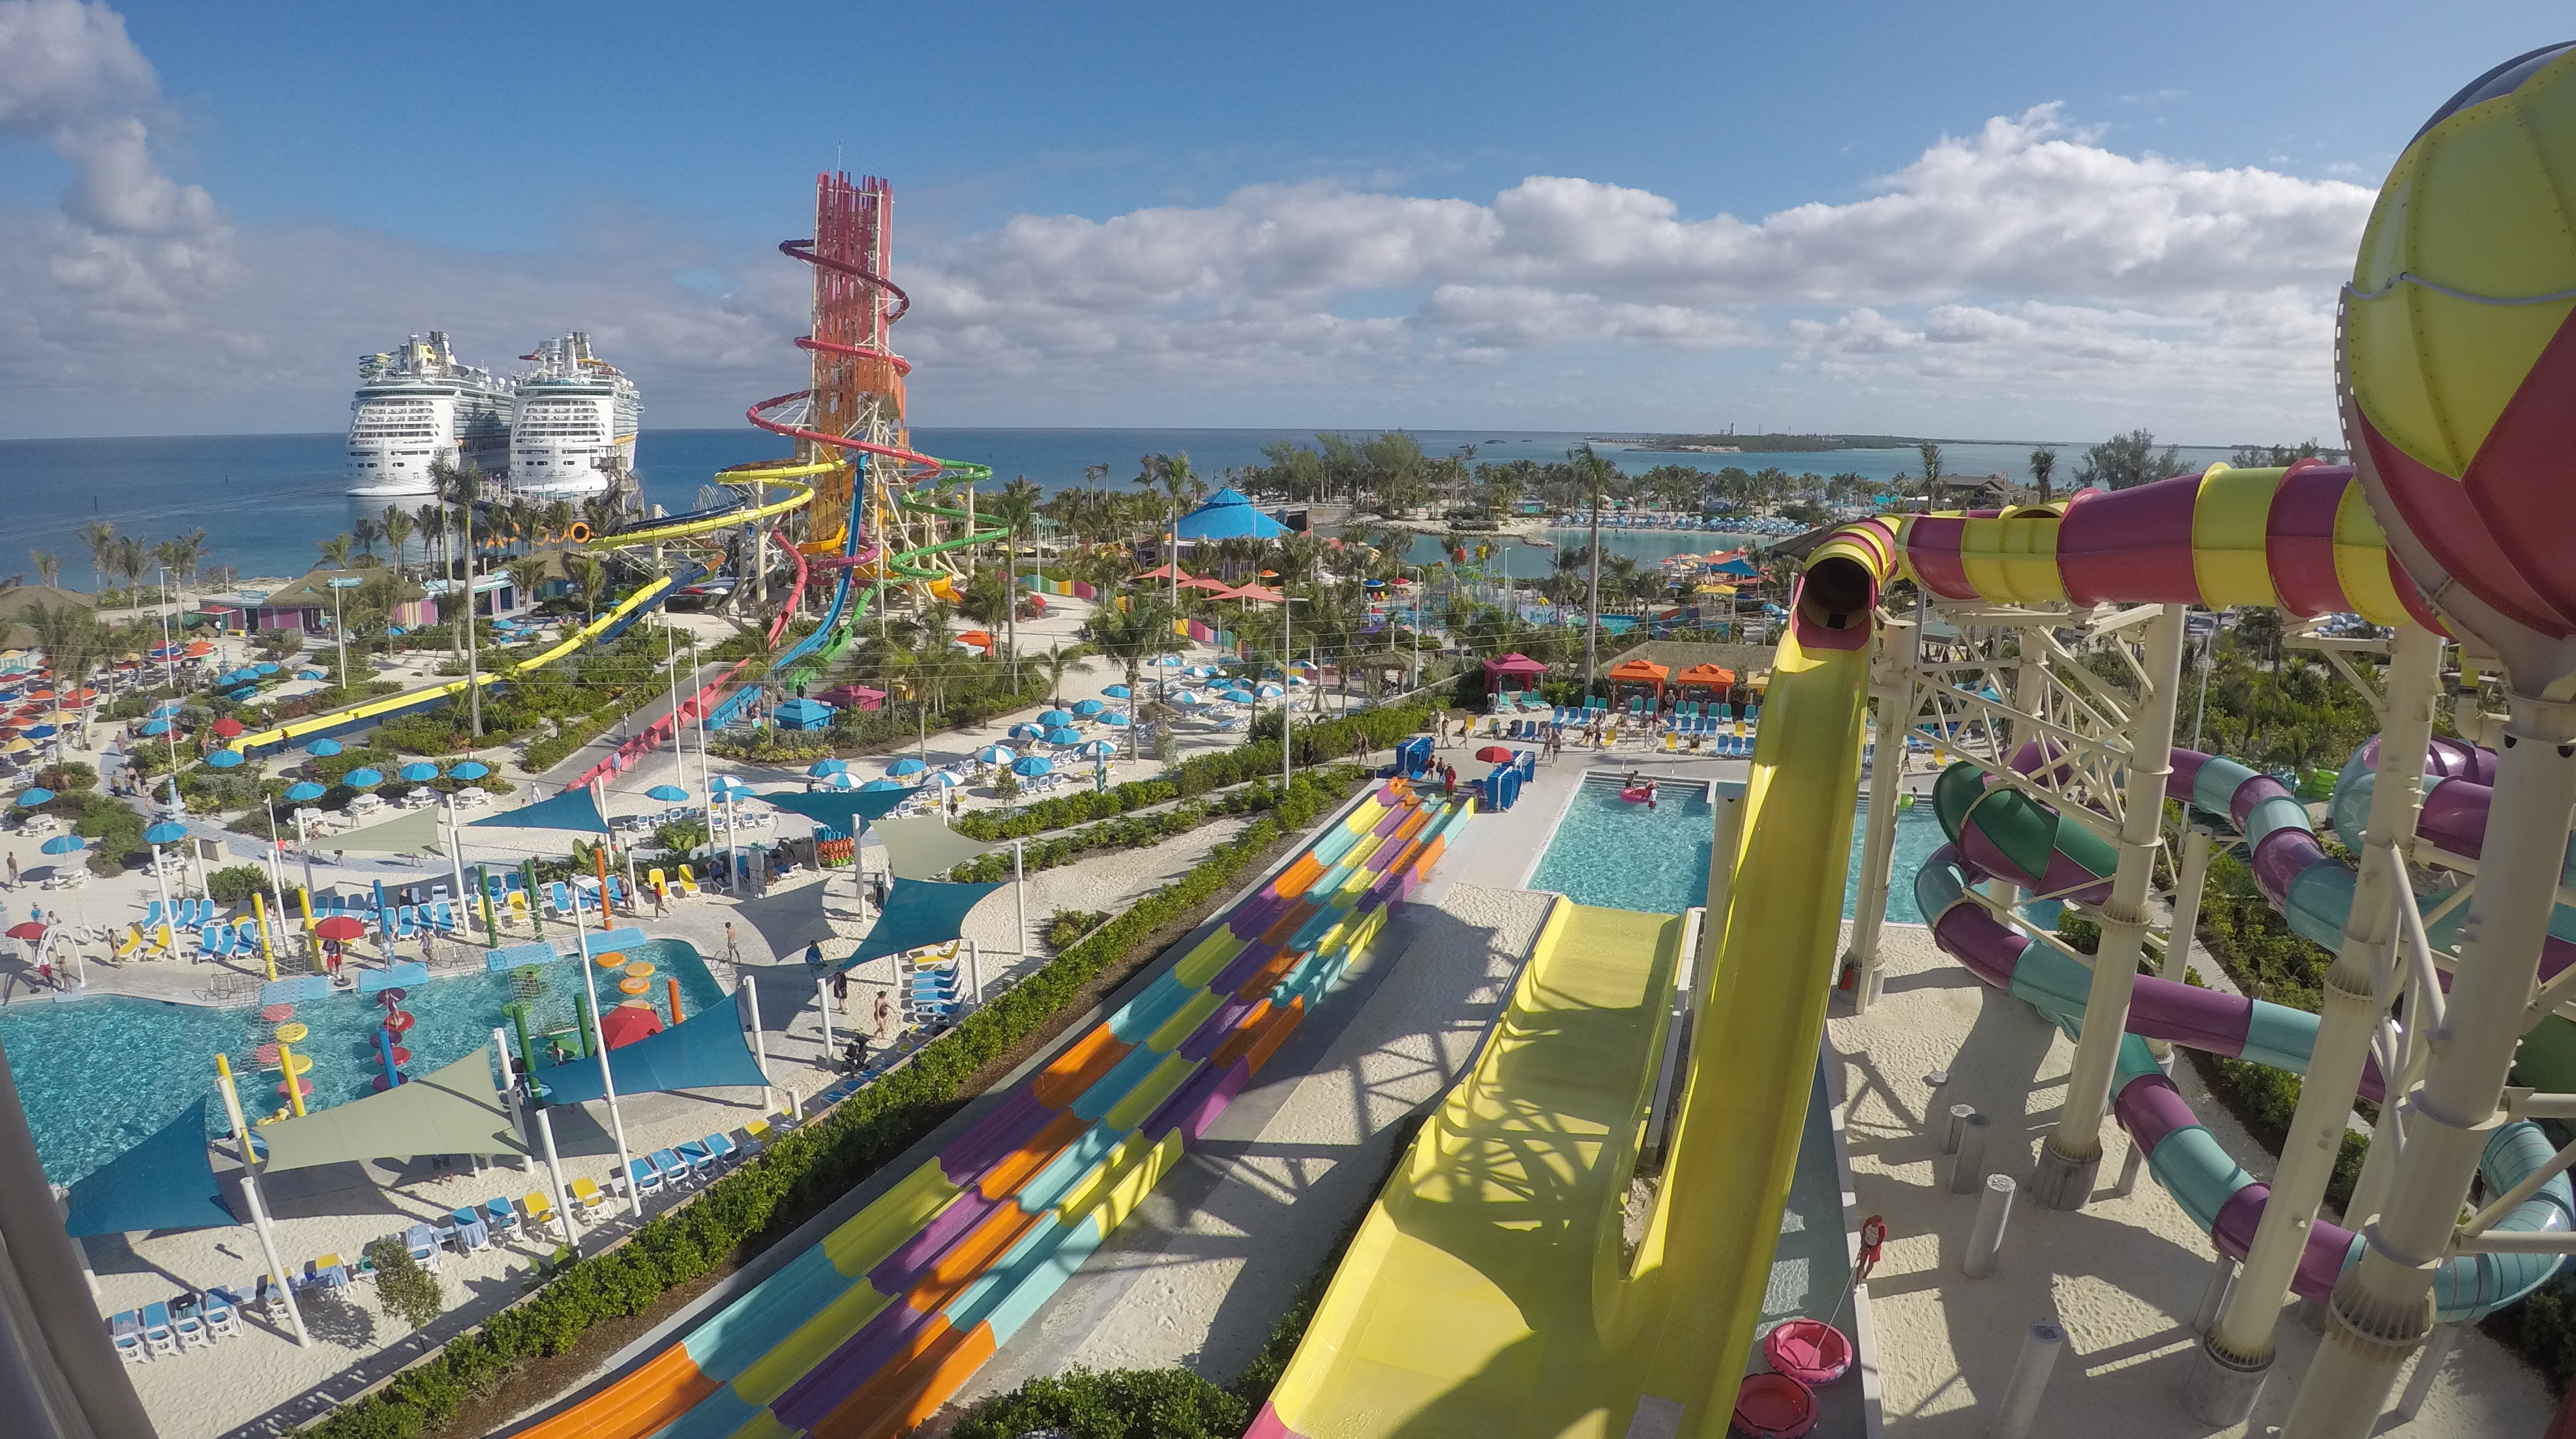 Perfect Day at CocoCay! (My Experience)